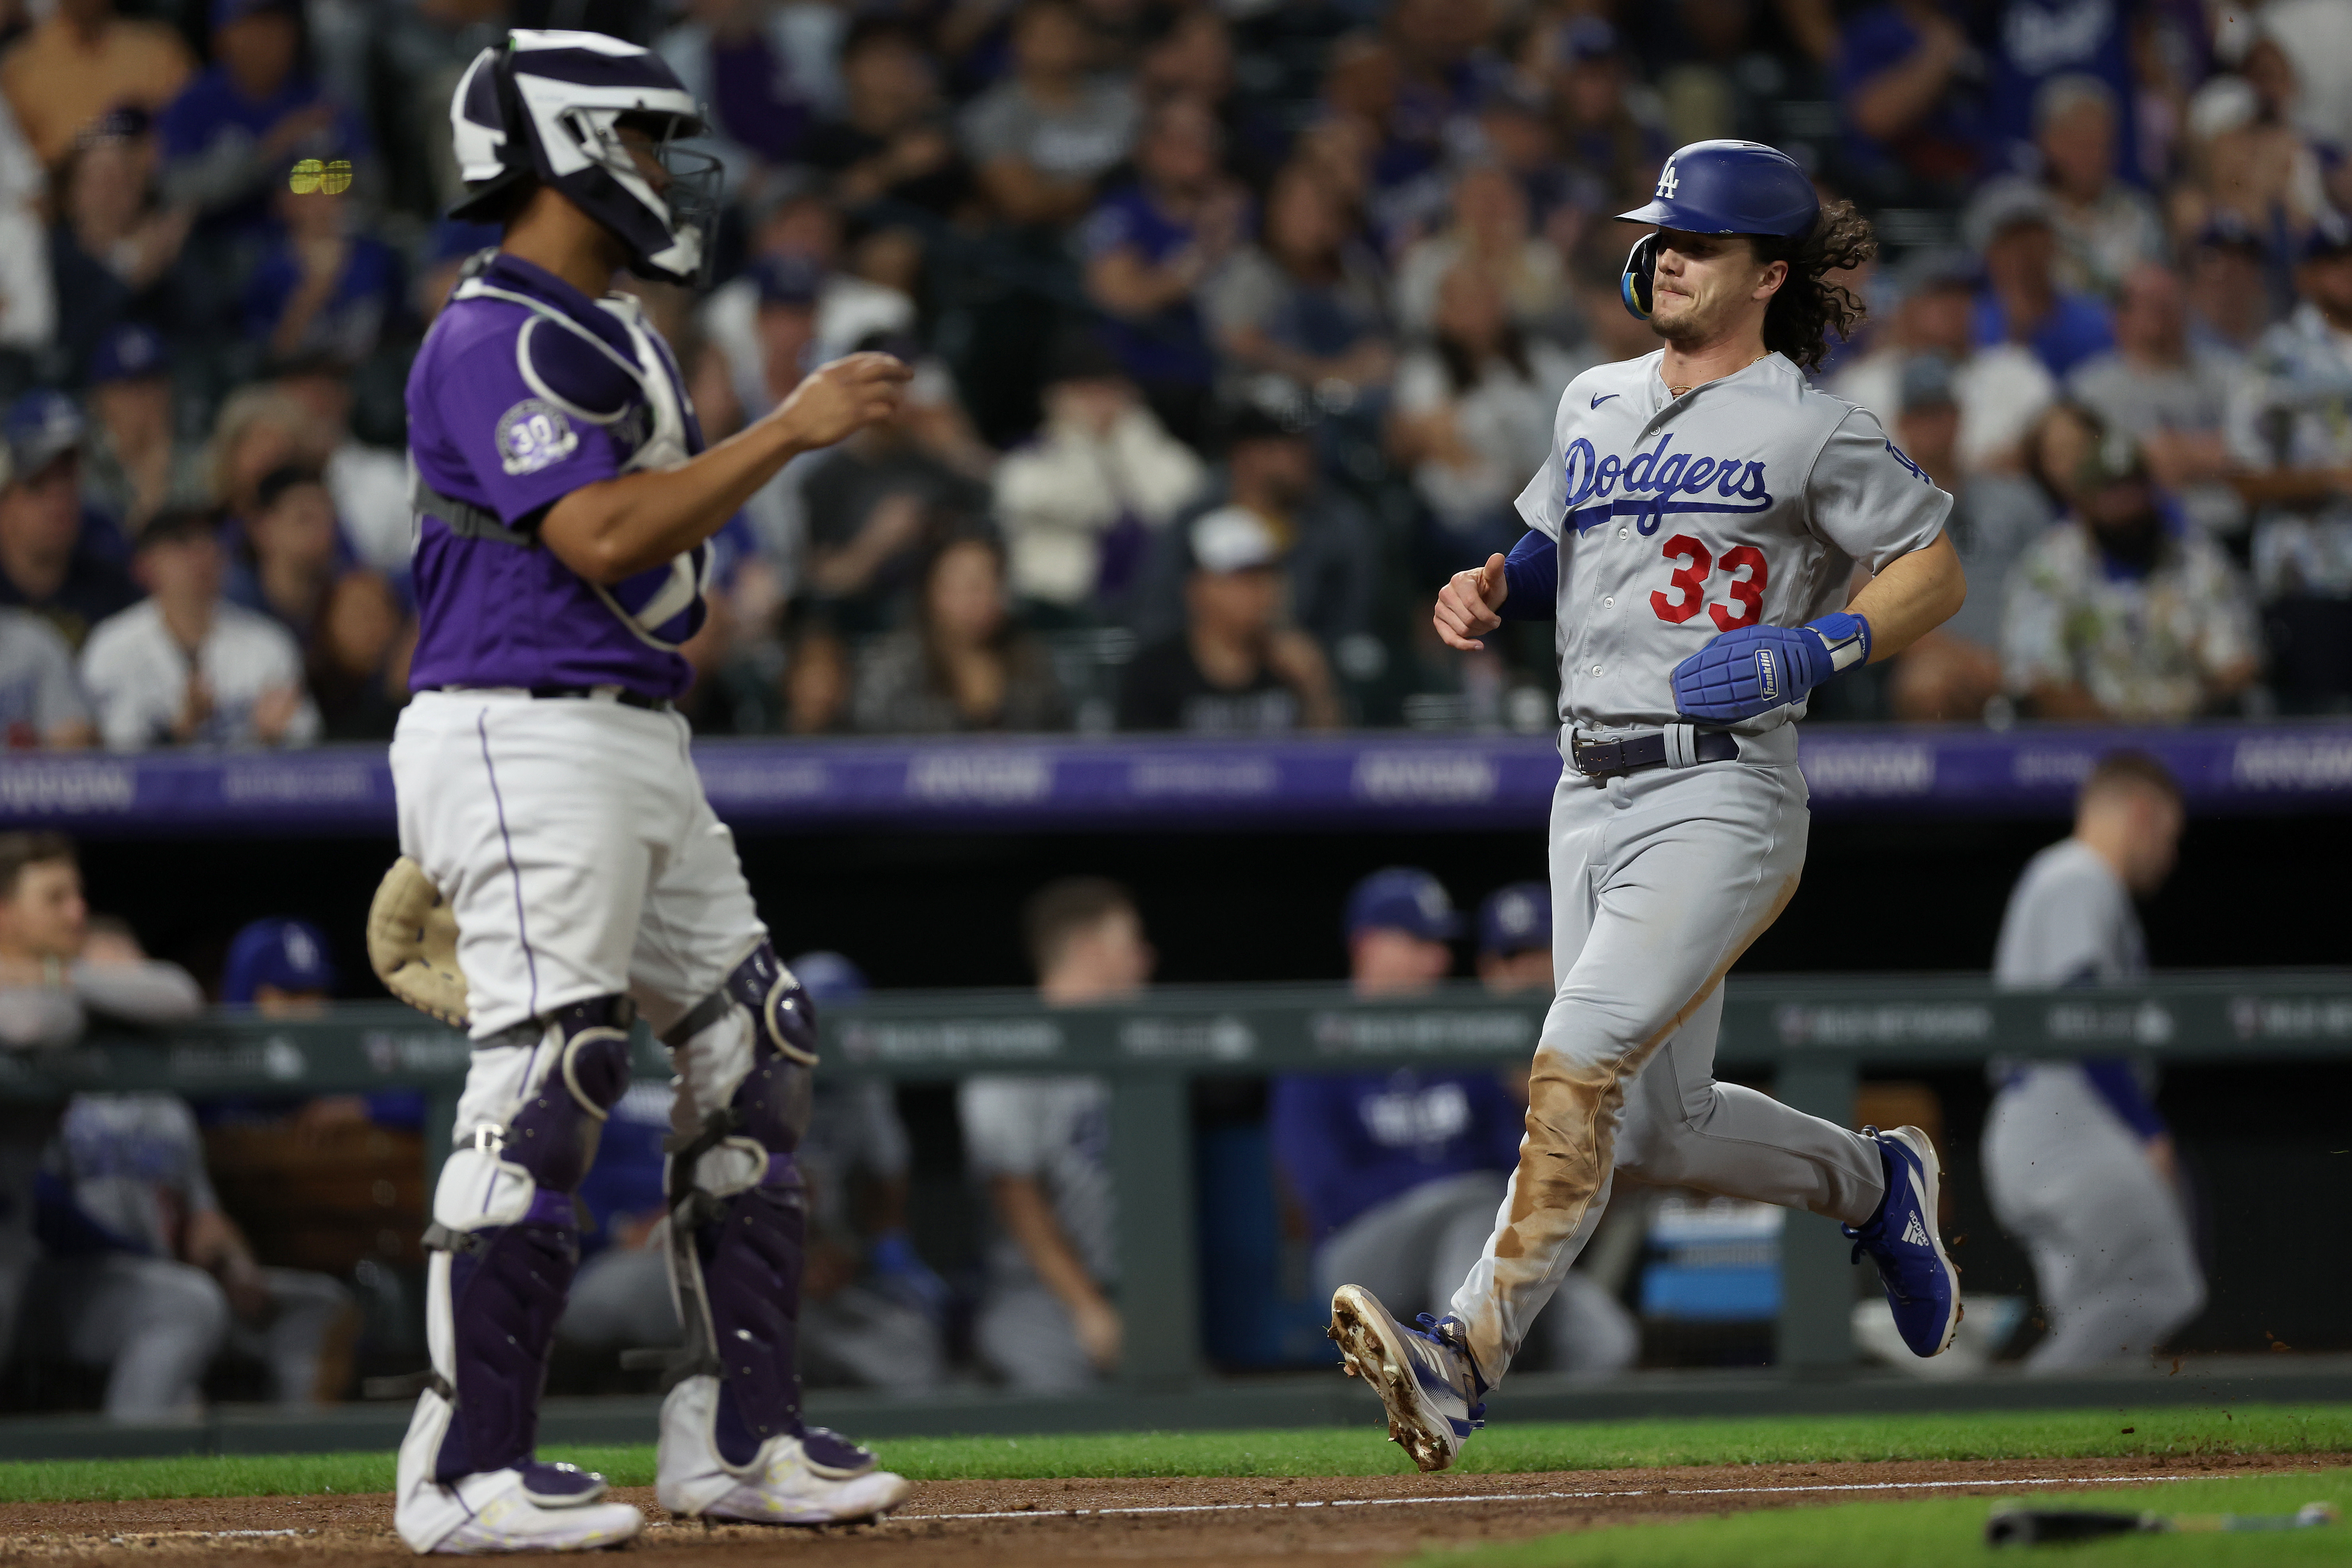 Rockies dominate Dodgers, 14-5, in biggest victory over L.A. in